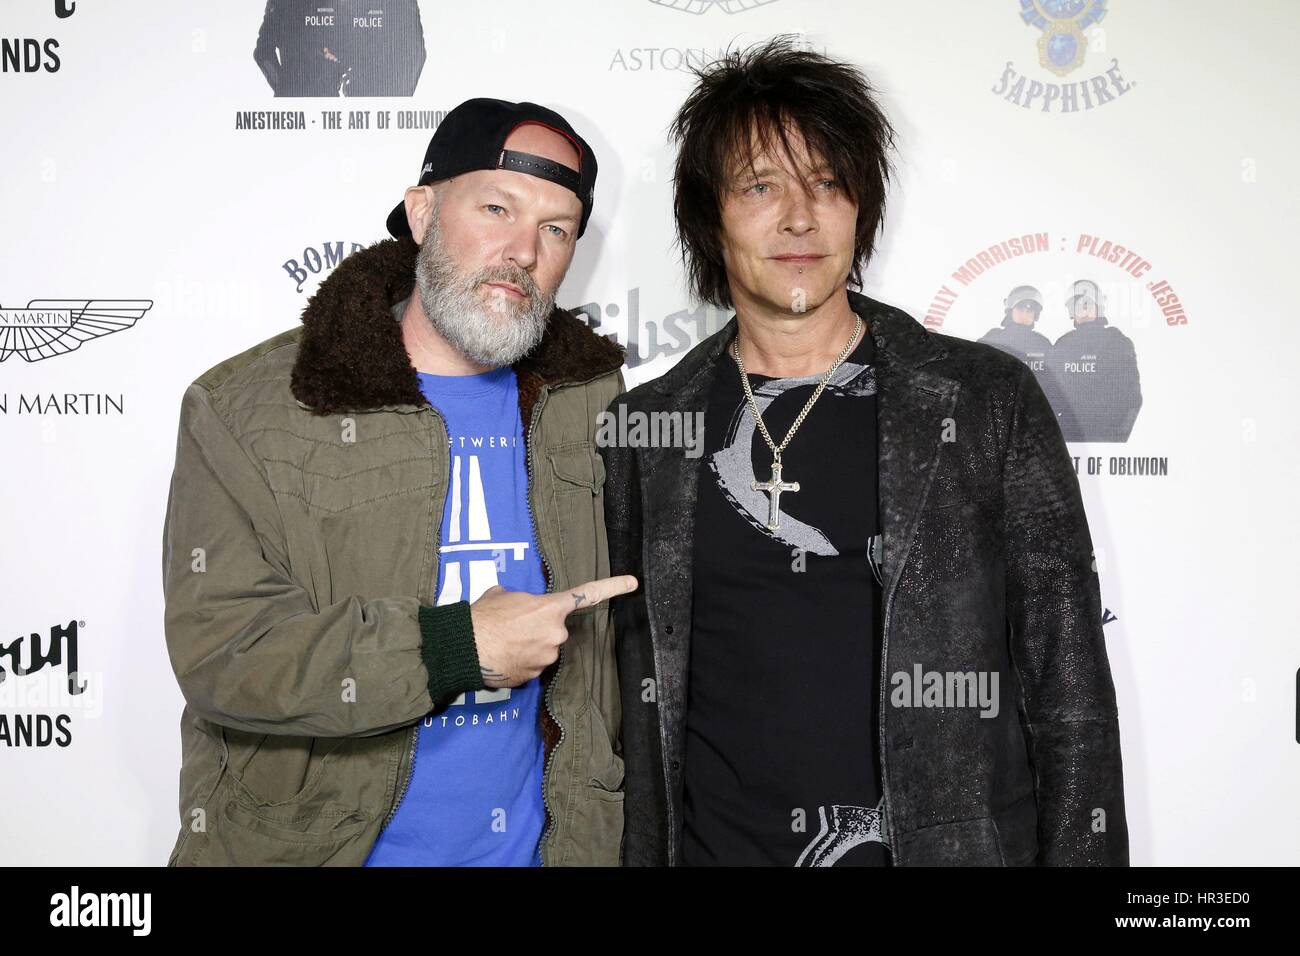 West Hollywood, California. 24th Feb, 2017. Fred Durst and Billy Morrison attend the 'Anesthesia: The Art of Oblivion' by Billy Morrison & Plastic Jesus opening reception at Gibson Brands Sunset on February 24, 2017 in West Hollywood, California. | usage worldwide Credit: dpa/Alamy Live News Stock Photo